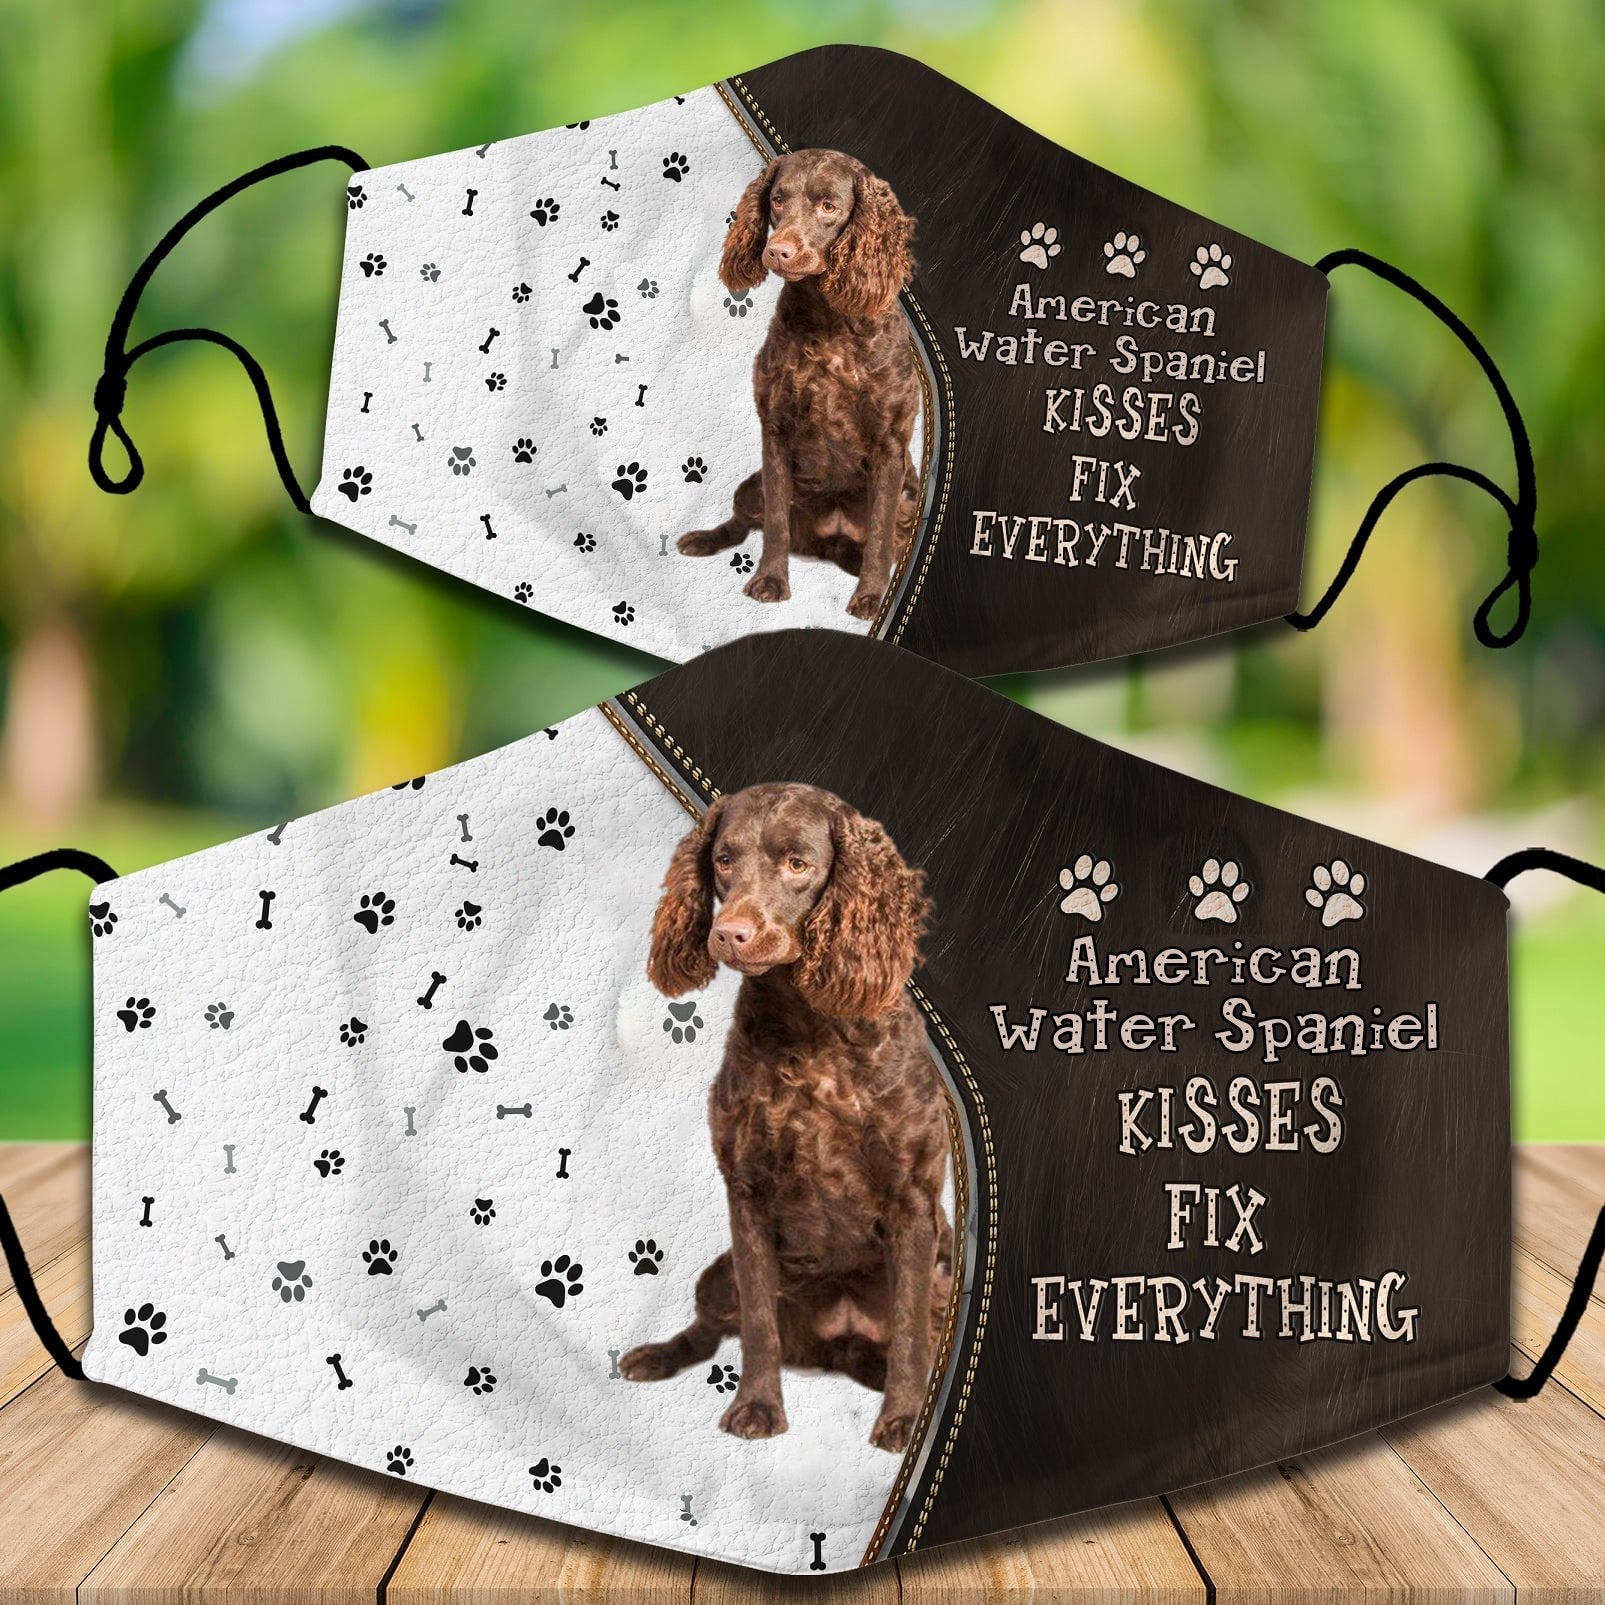 American Water Spaniel Kisses Fix Everything Veil